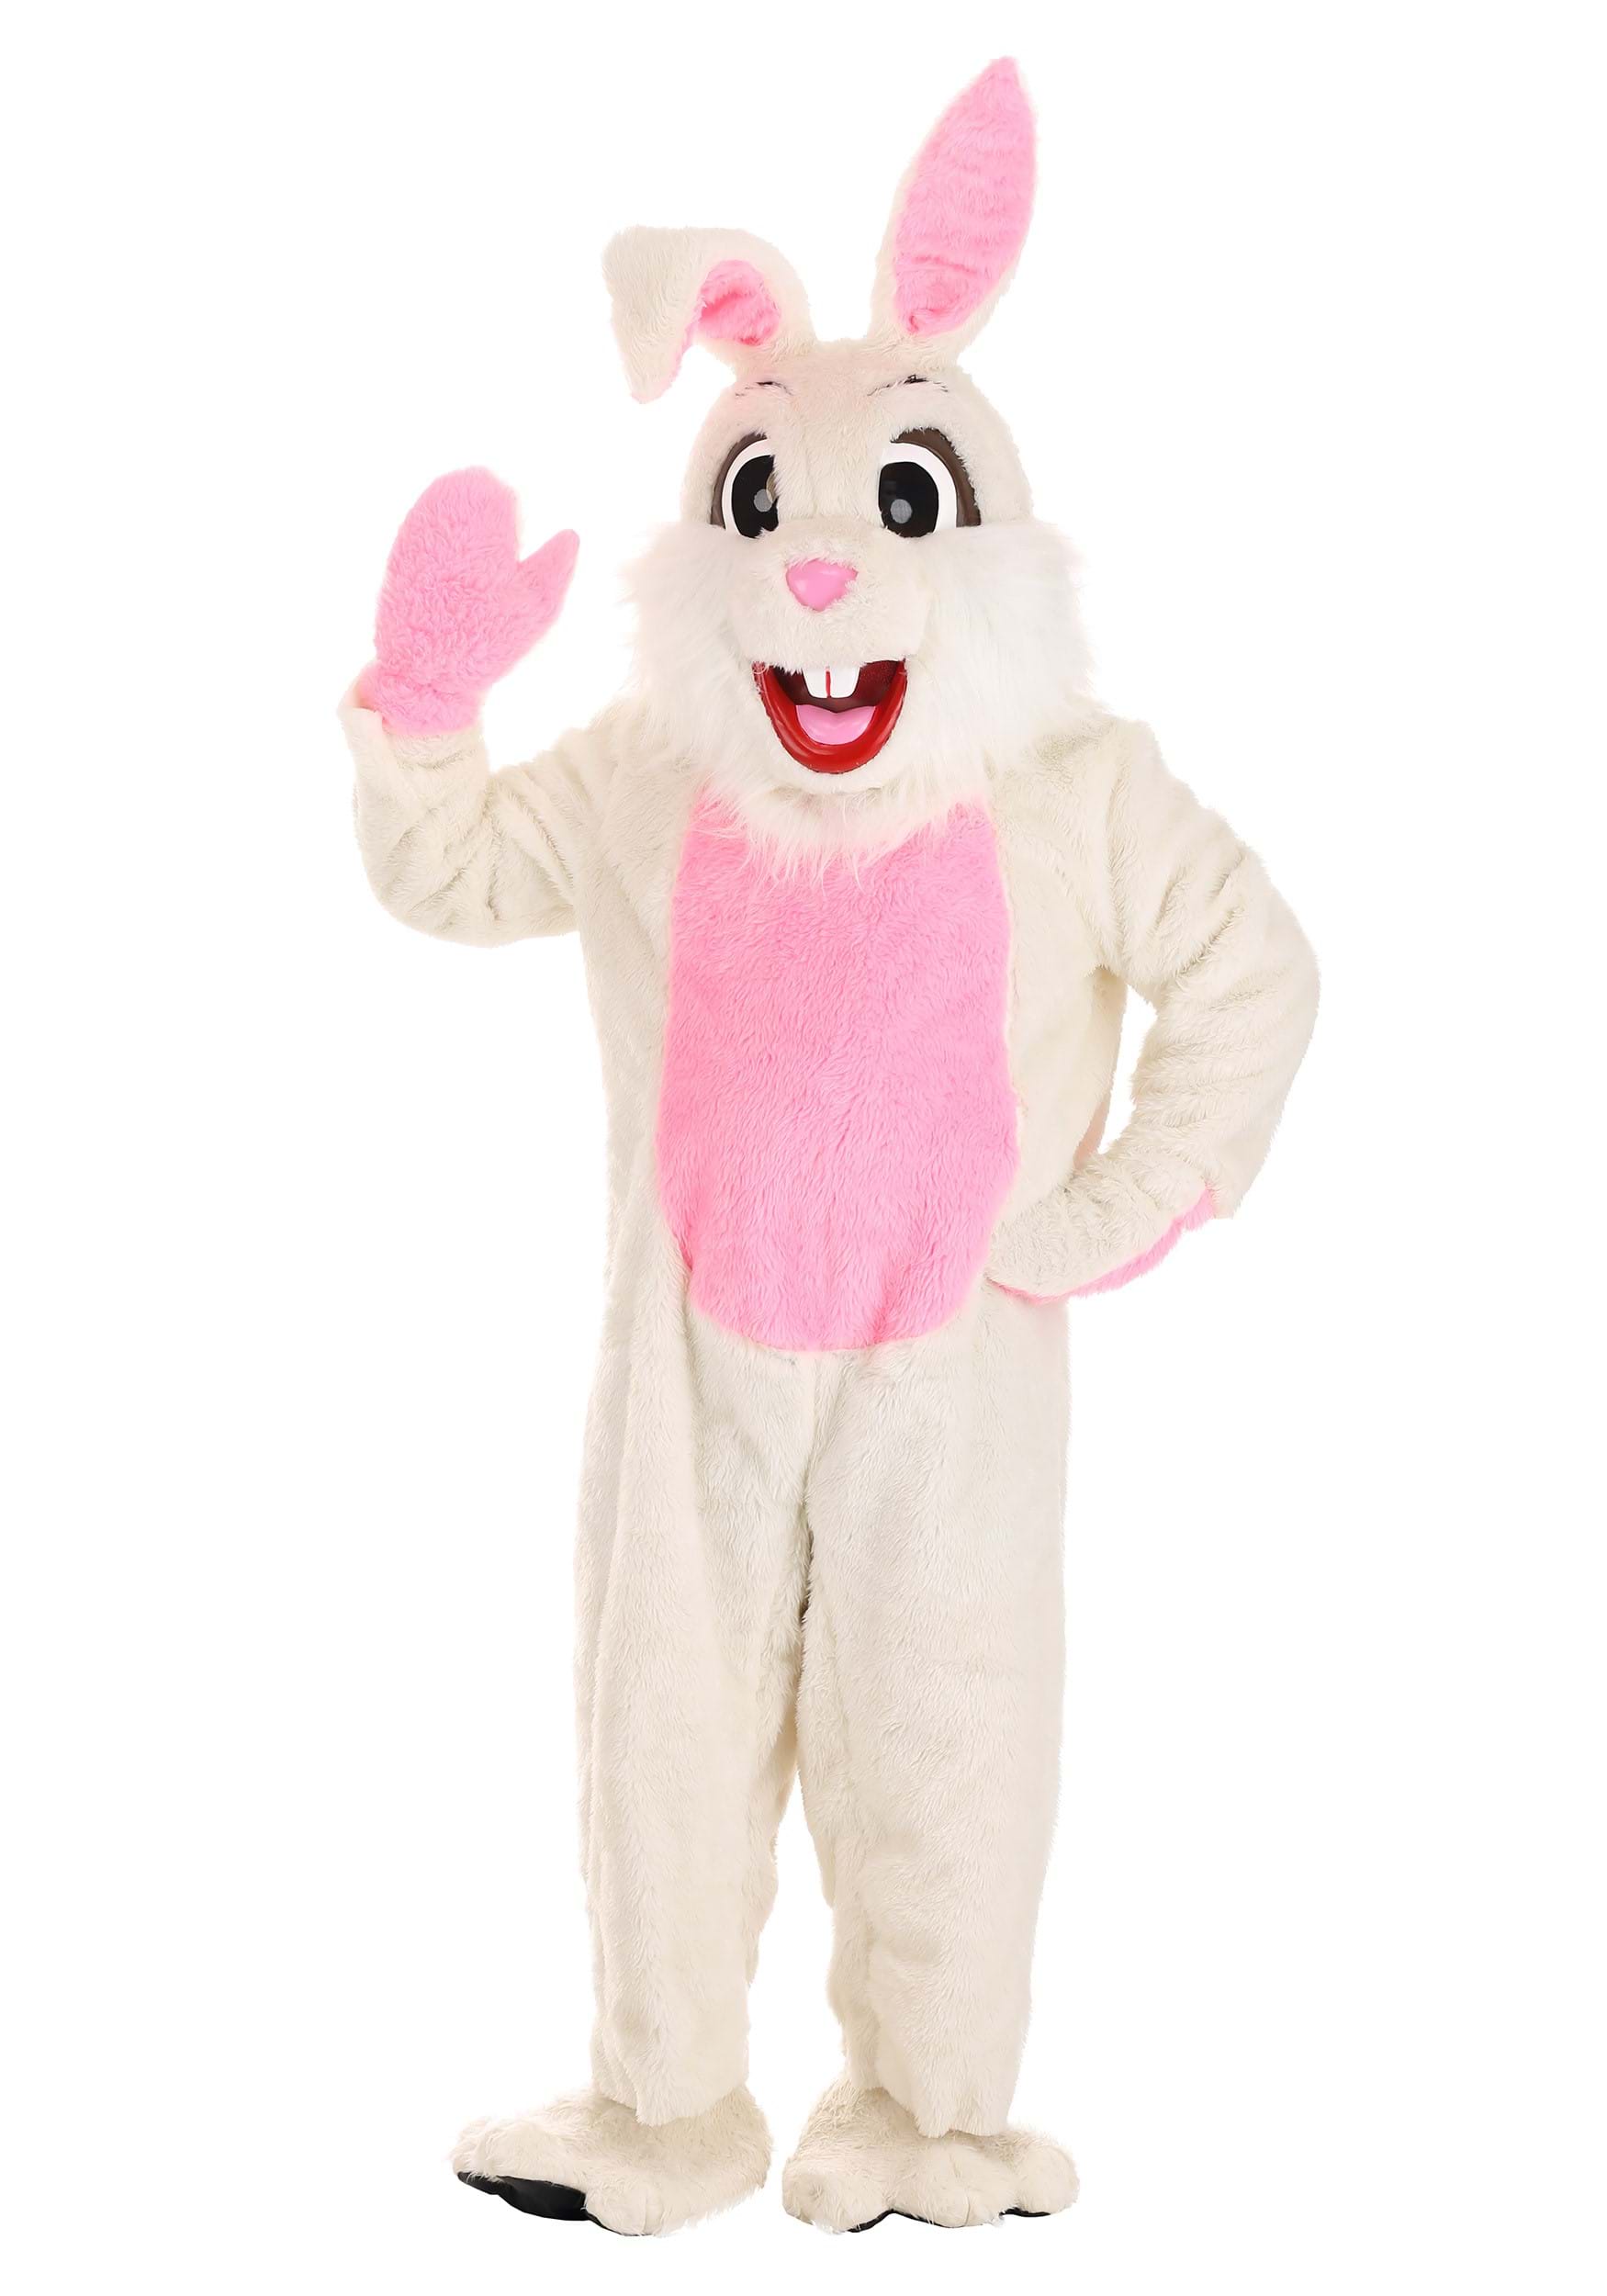 Photos - Fancy Dress FUN Costumes Adult White Easter Bunny Mascot Costume Pink/White